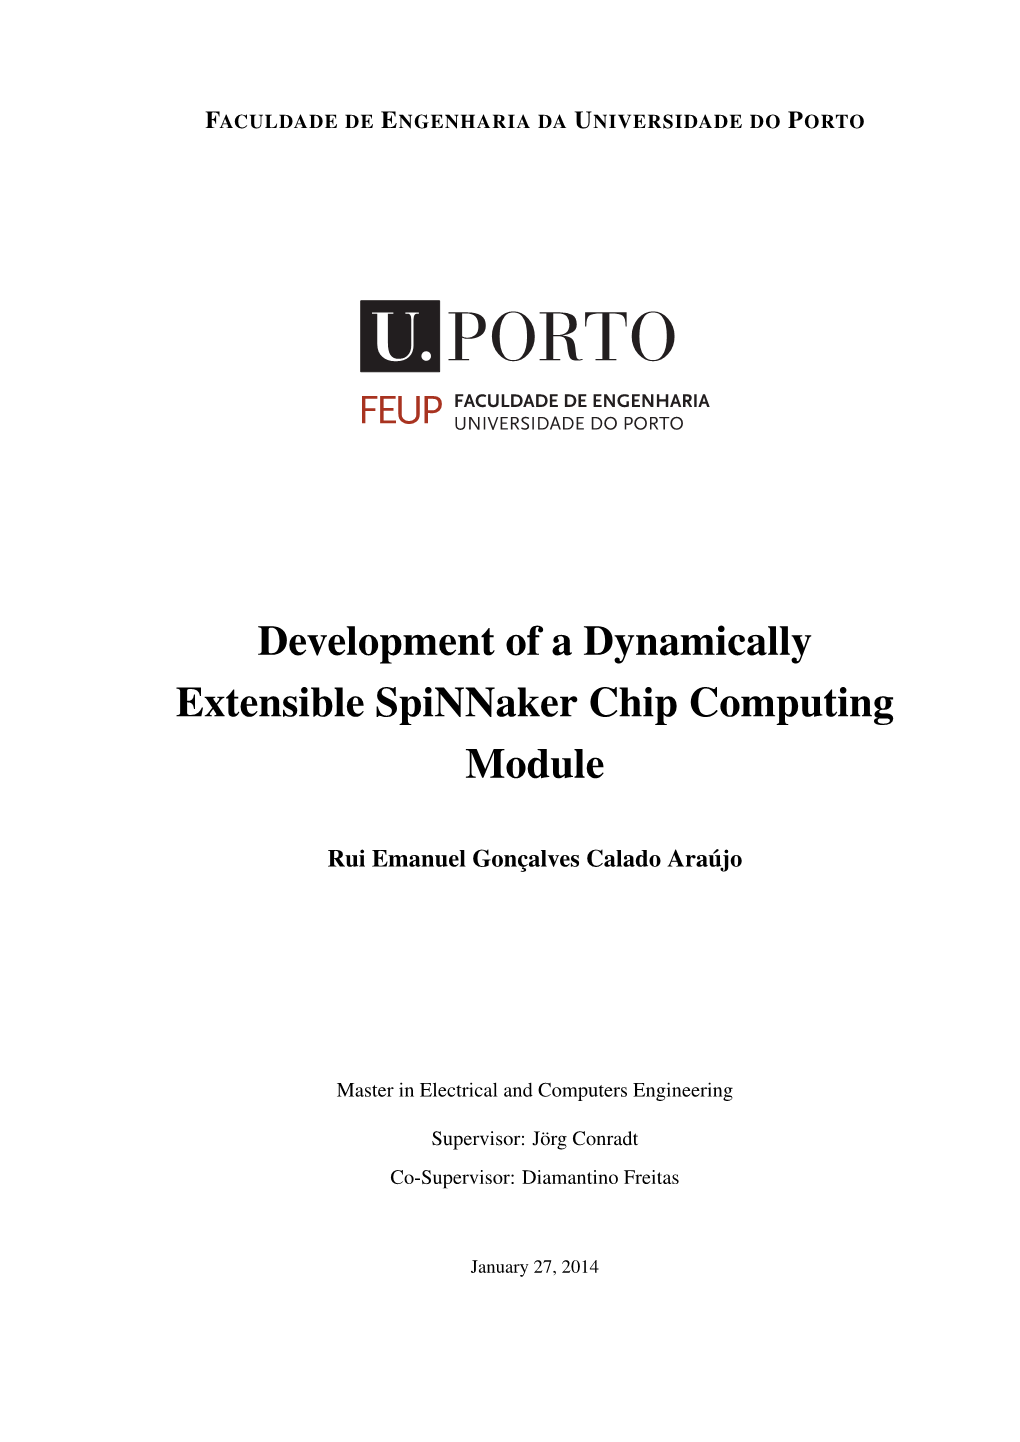 Development of a Dynamically Extensible Spinnaker Chip Computing Module